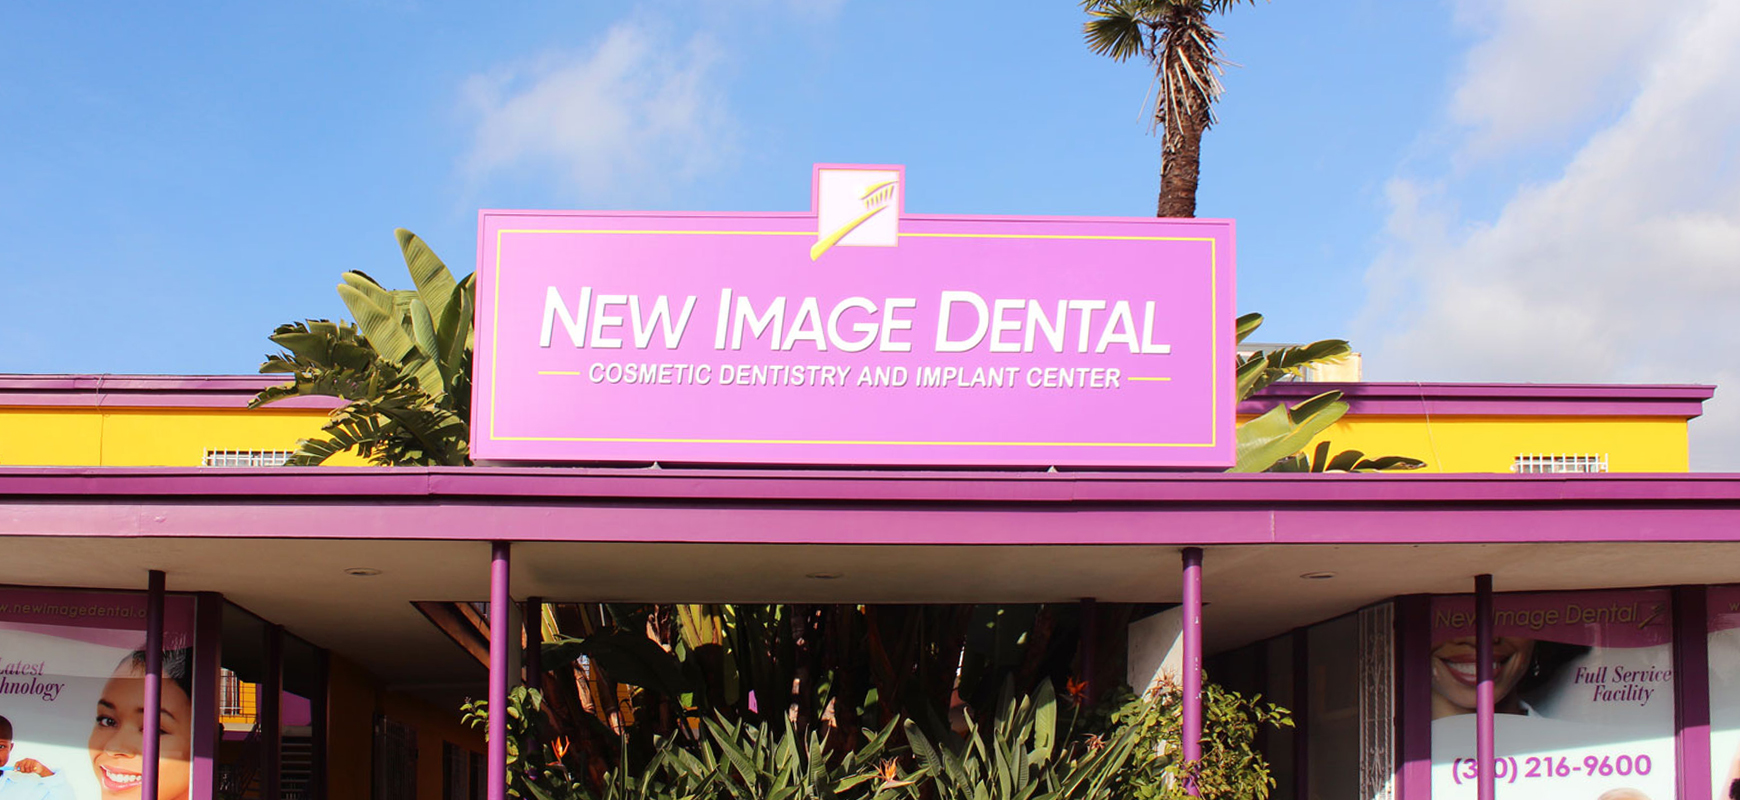 New Image Dental outdoor medical office sign in pink and white